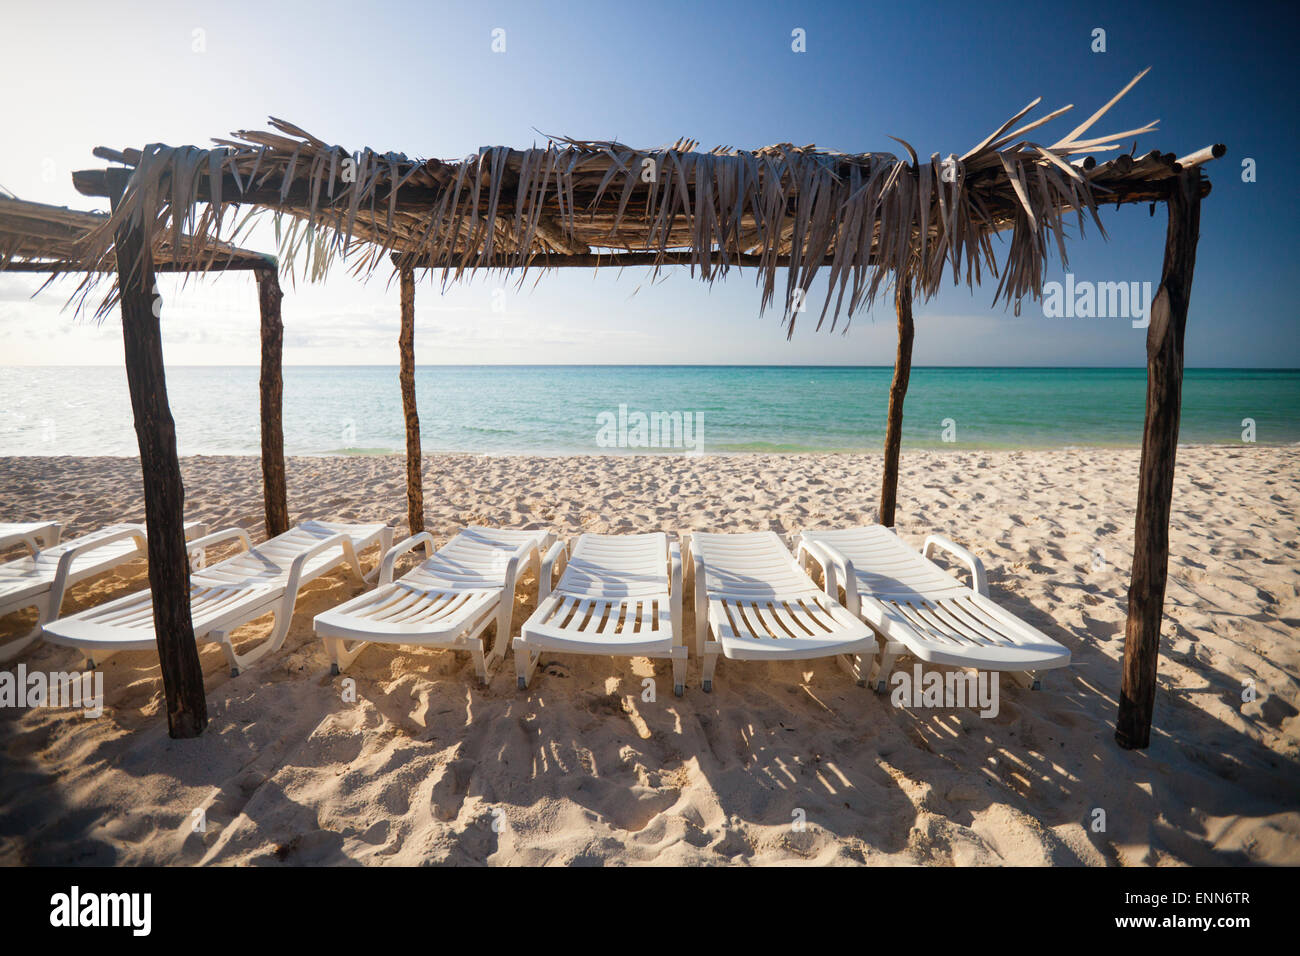 A palm leaf roof structure covers several beach chairs facing the ocean on Playa La Jaula beach, Cayo Coco, Cuba. Stock Photo